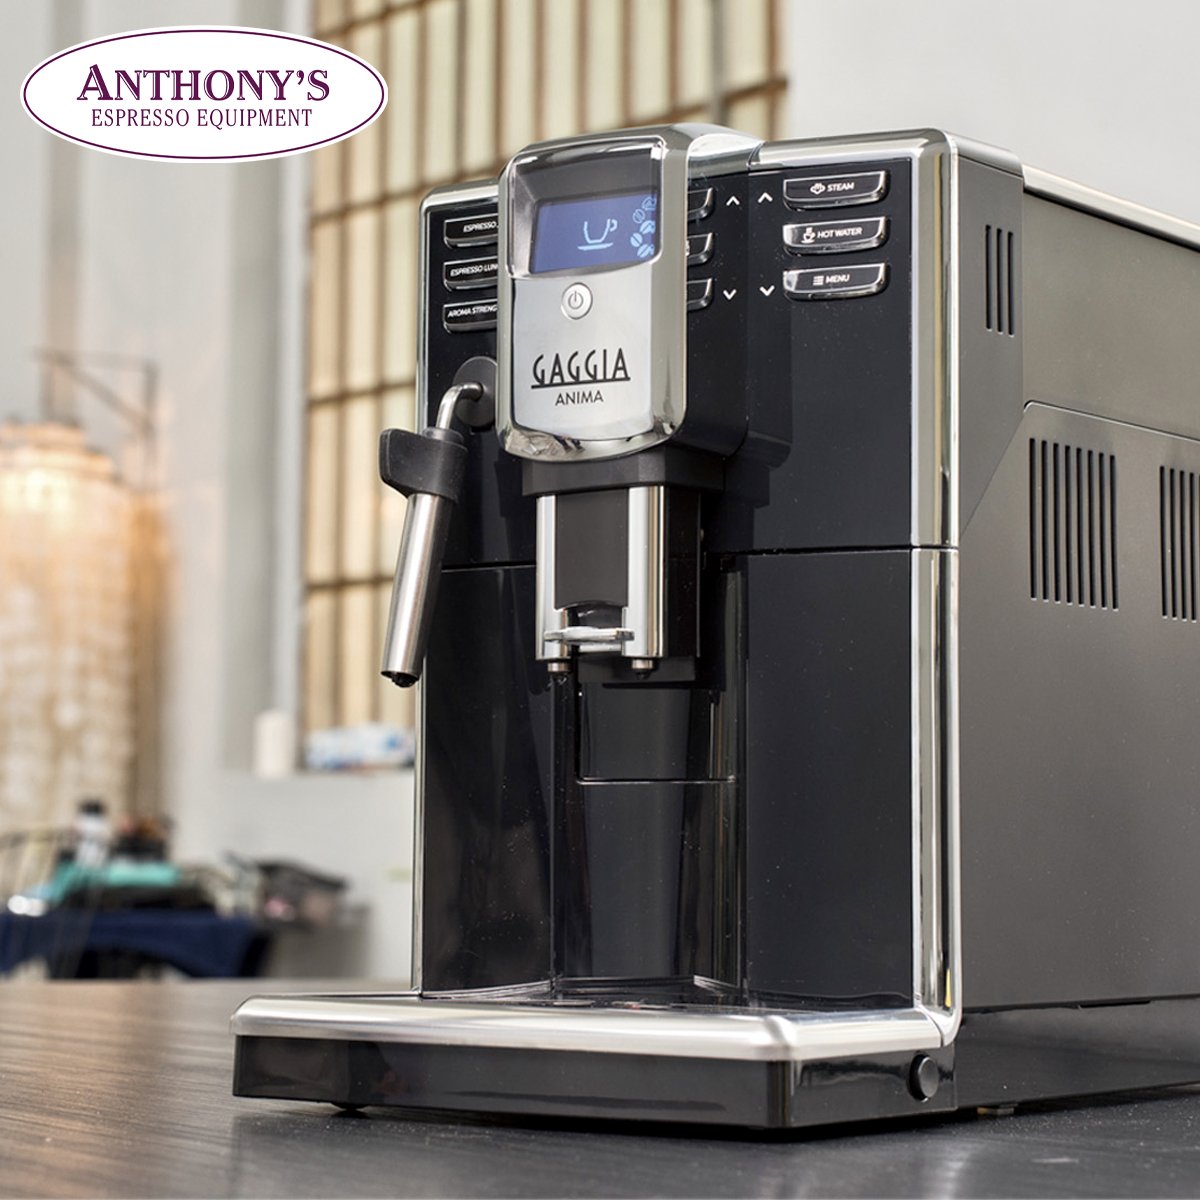 The Gaggia Anima - An Intuitive Display - Anthony's Espresso